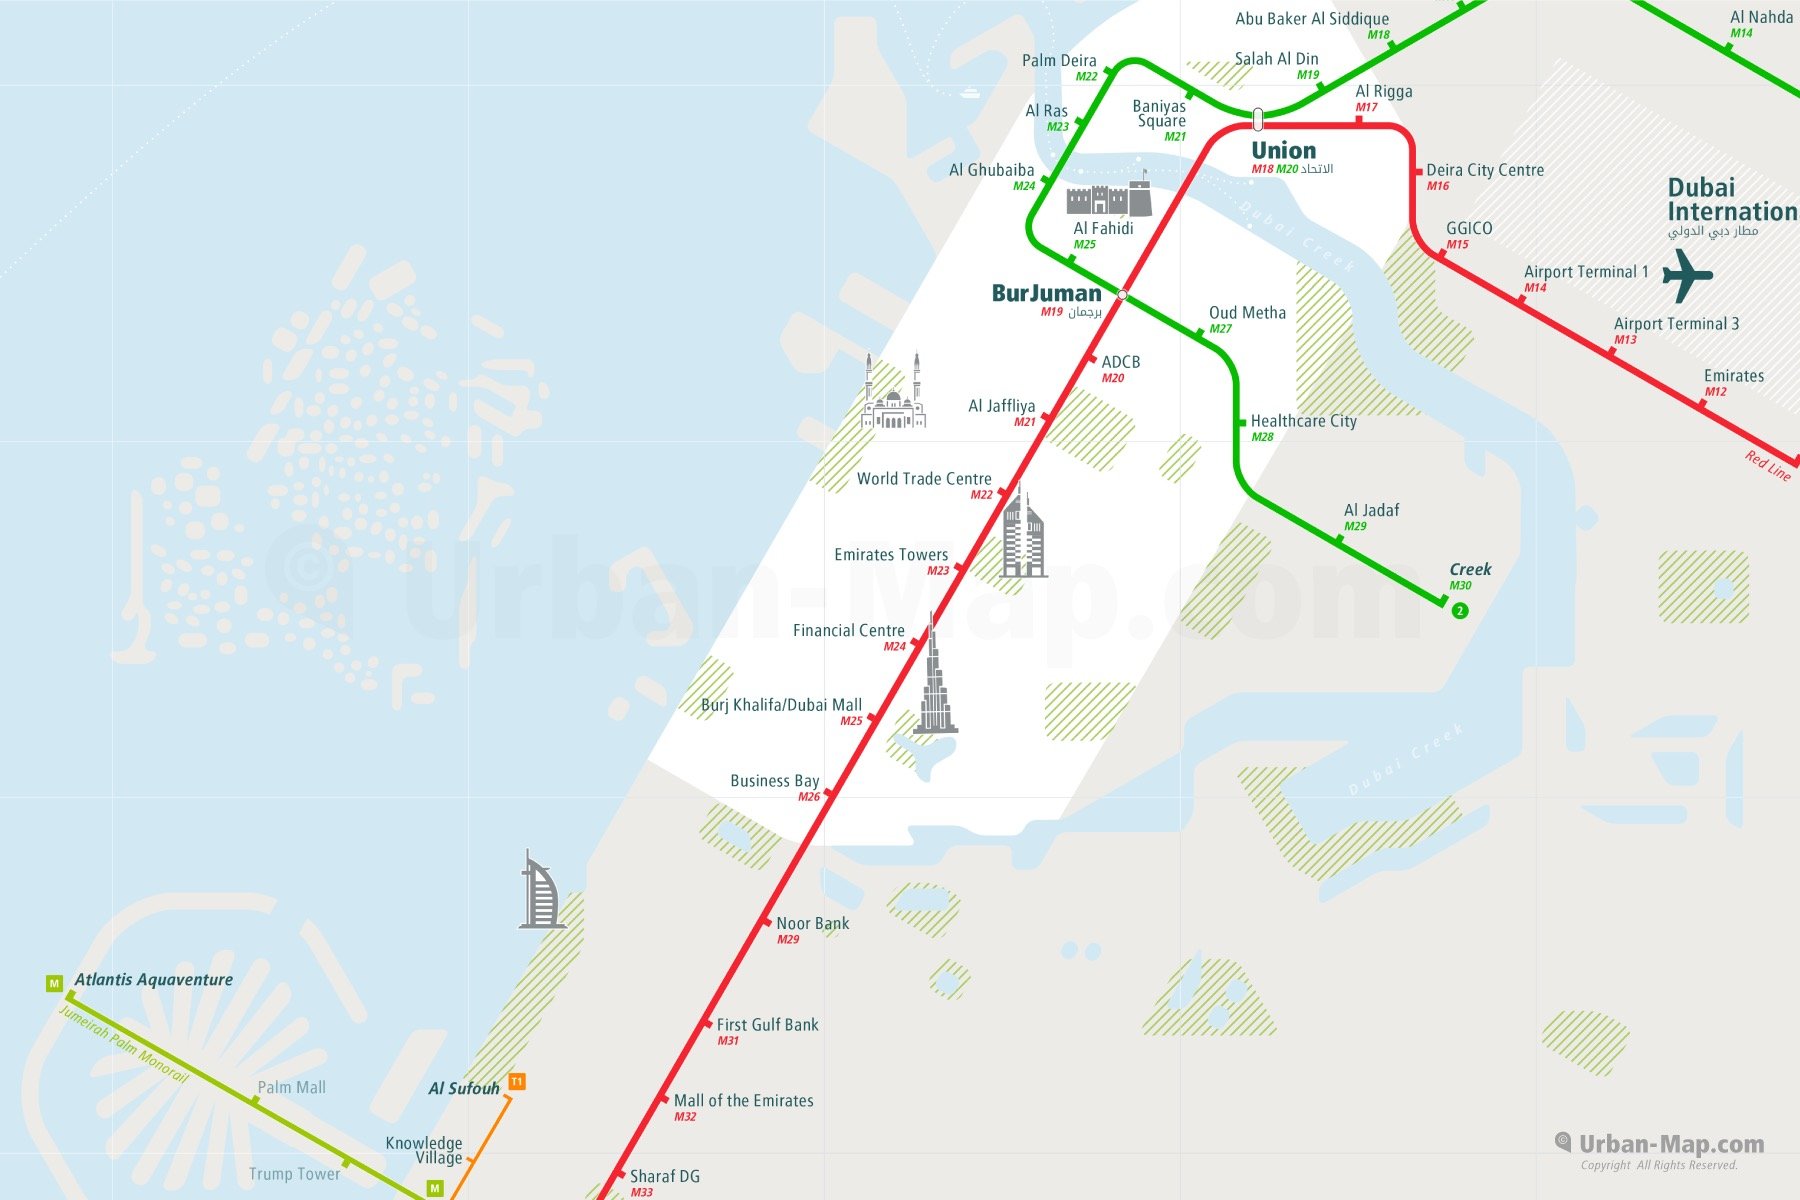 Dubai City Rail Map shows the train and public transportation routes of Metro, Monorail - Close-Up